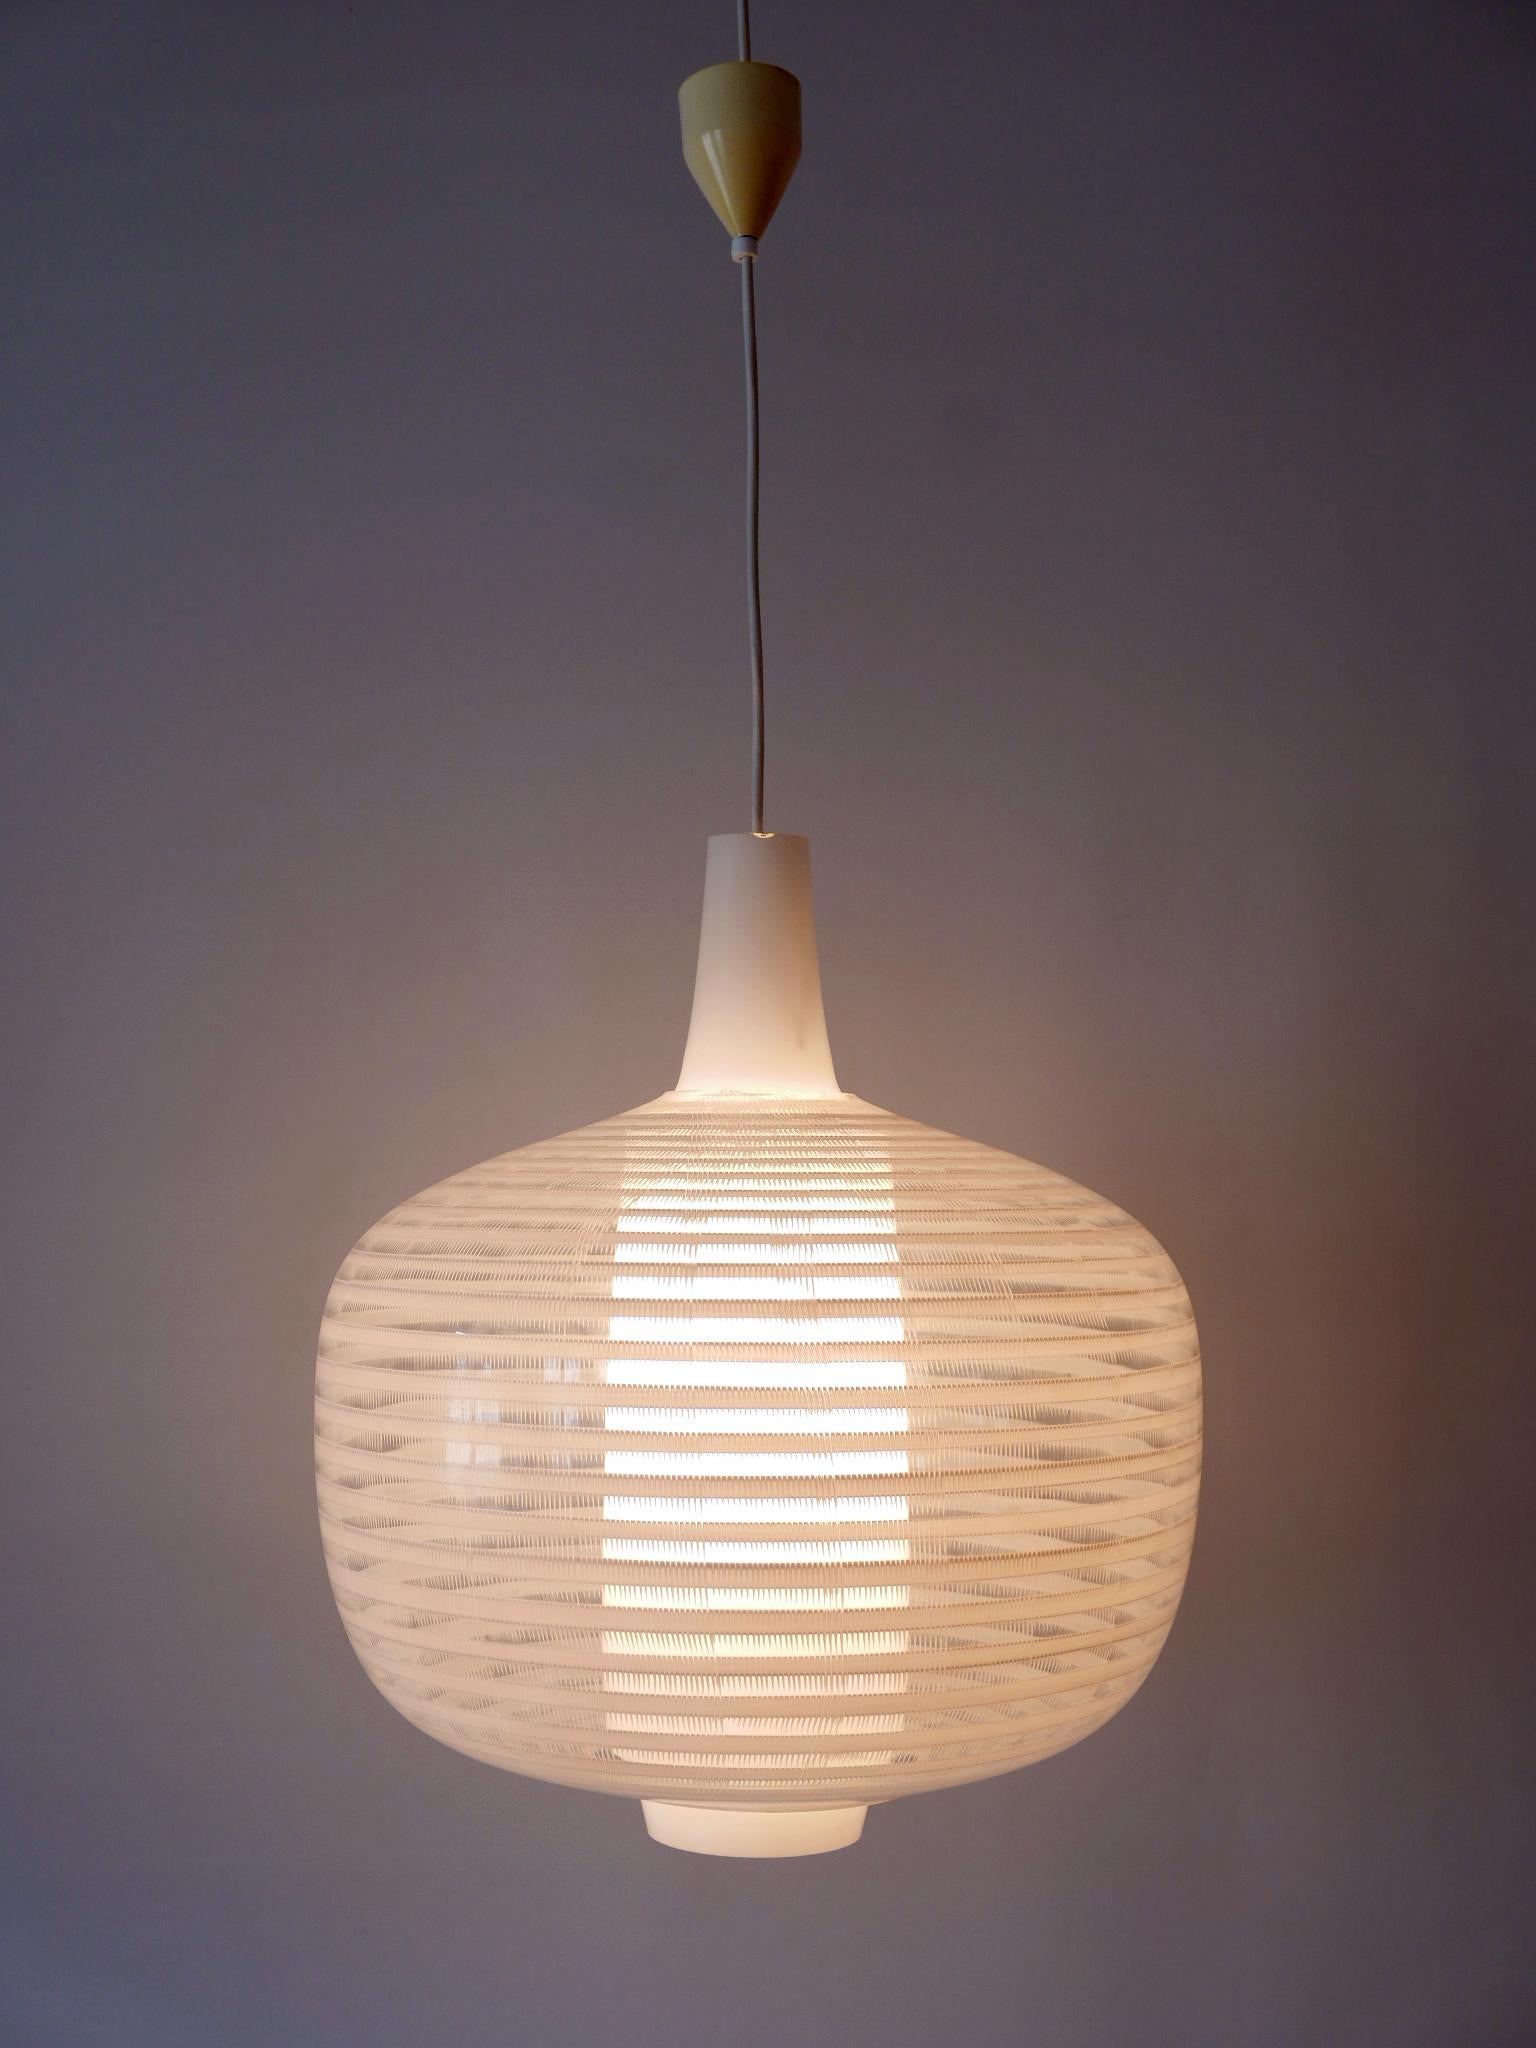 Mid-20th Century Rare & Large Mid-Century Modern Pendant Lamp Napoli by Aloys F. Gangkofner 1957 For Sale